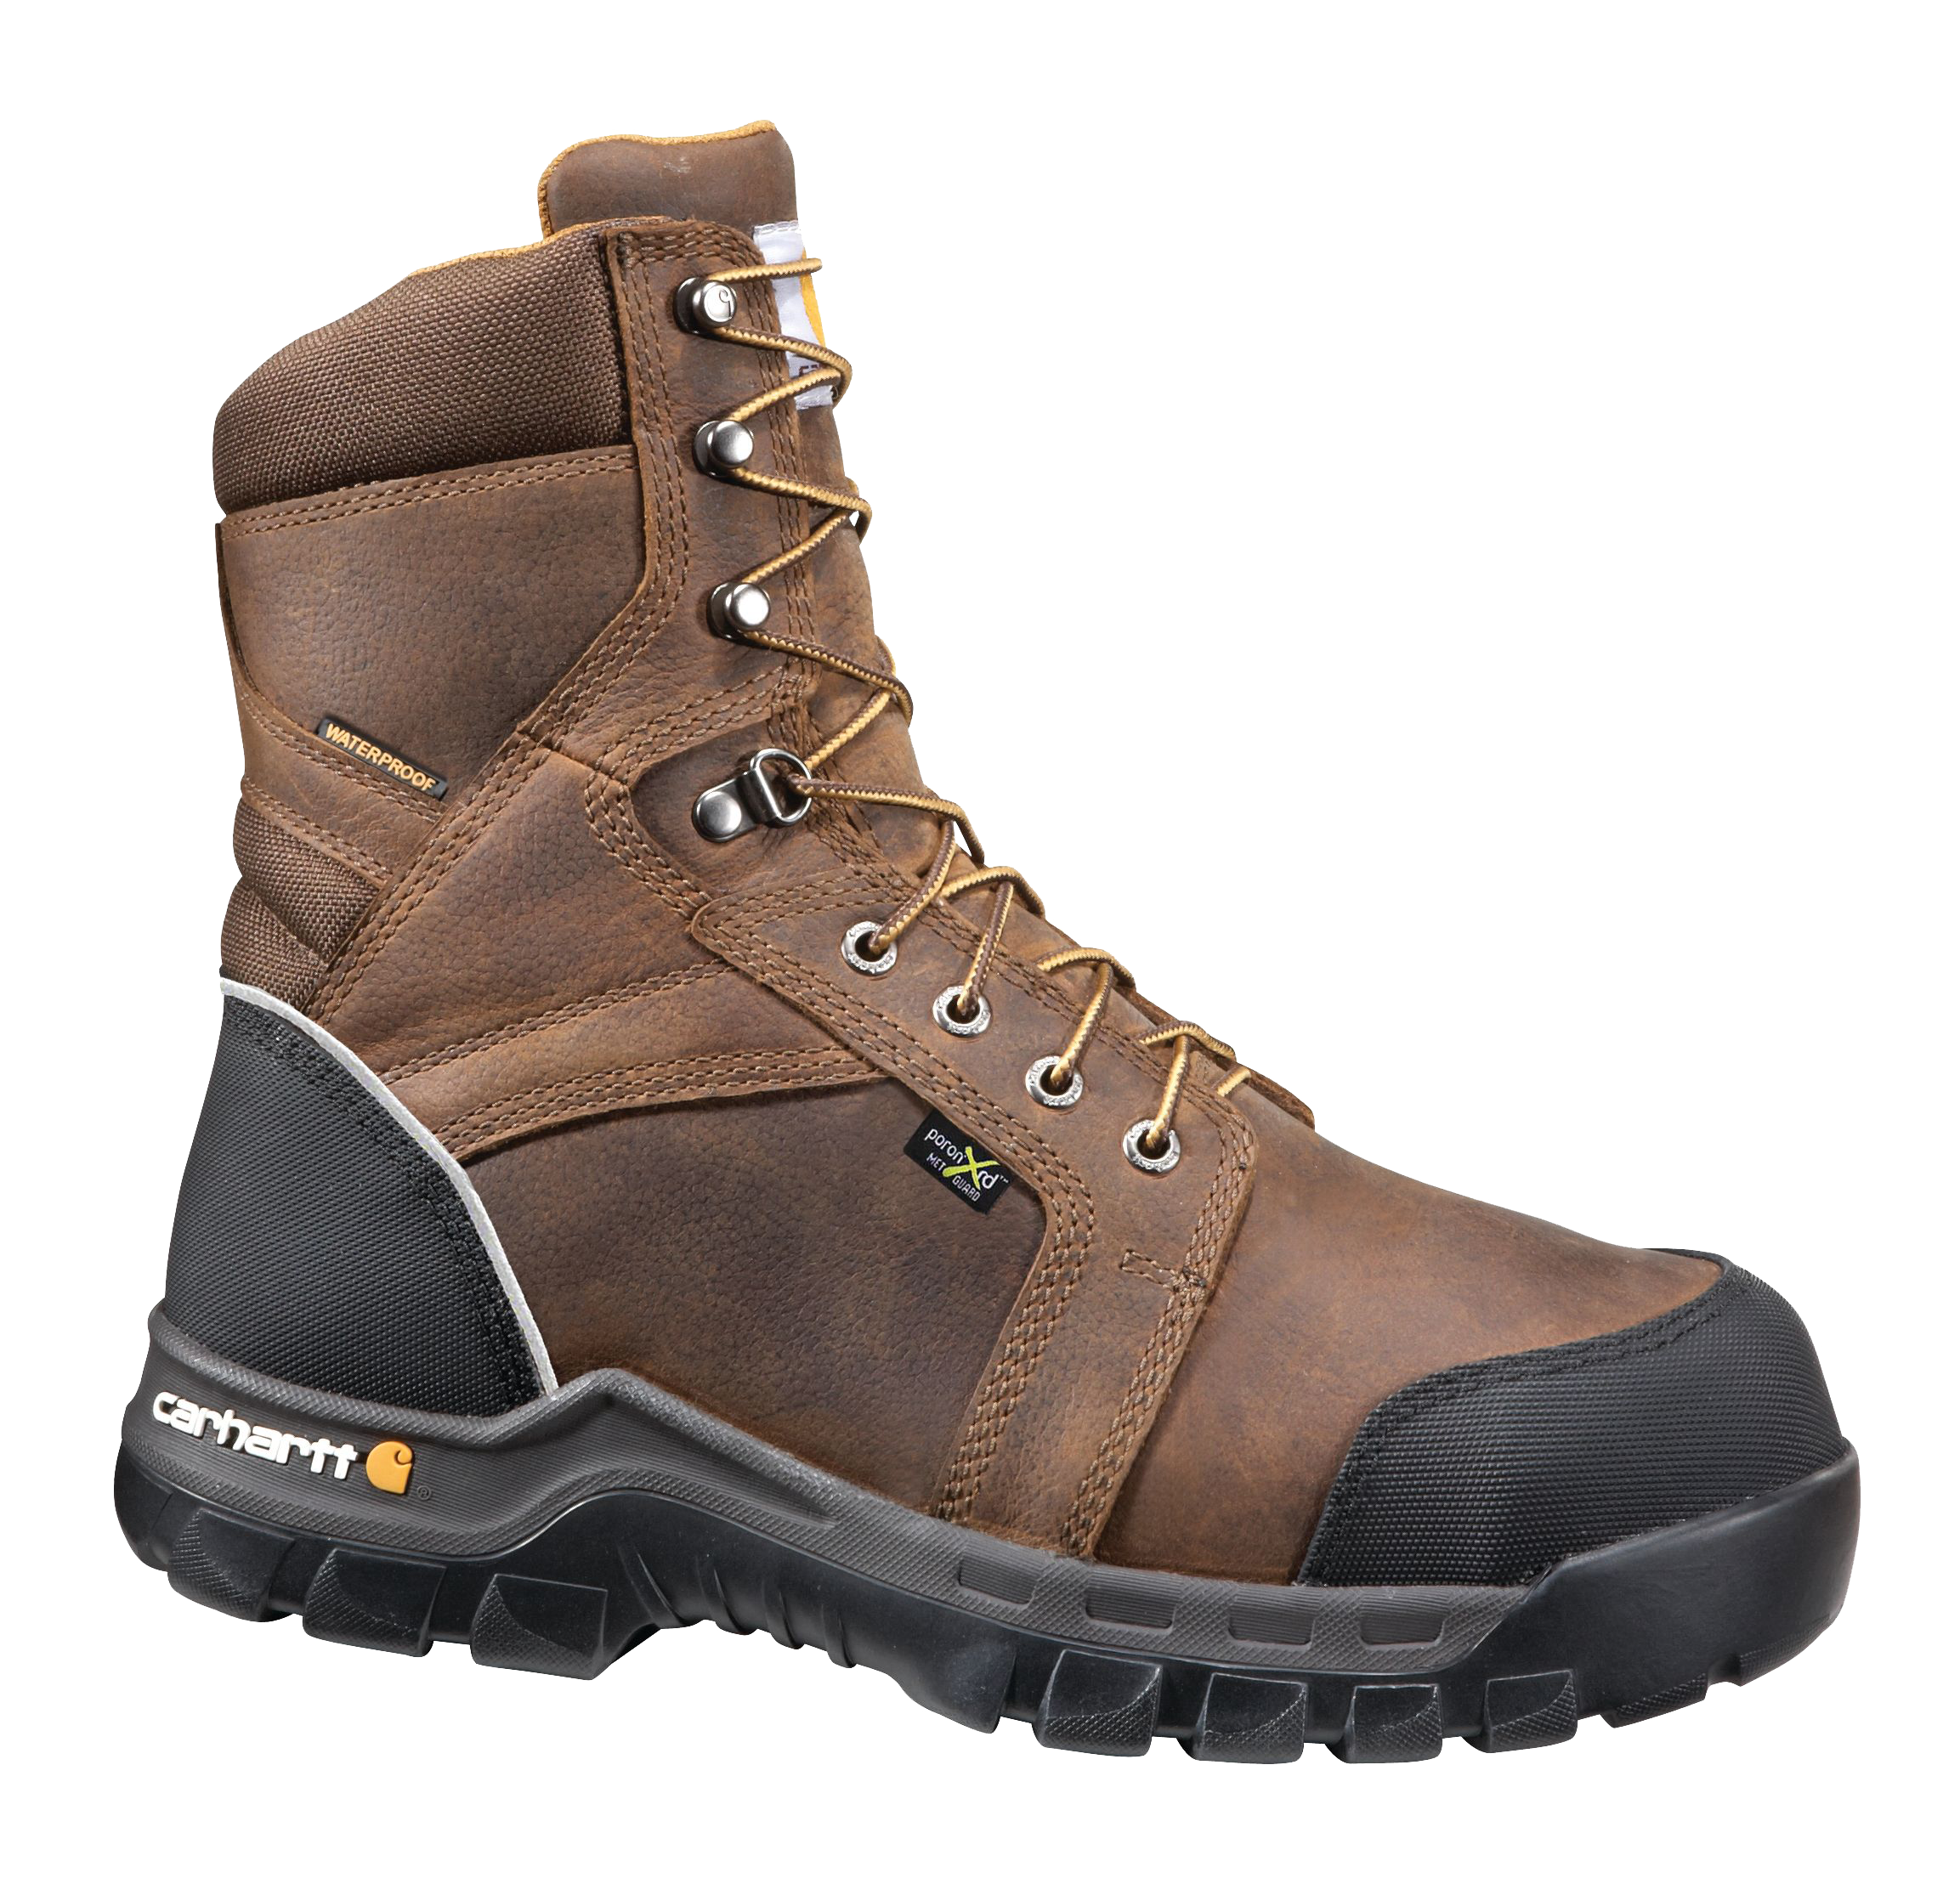 Carhartt Rugged Flex Waterproof Composite Toe Work Boots for Men with Metatarsal Guard